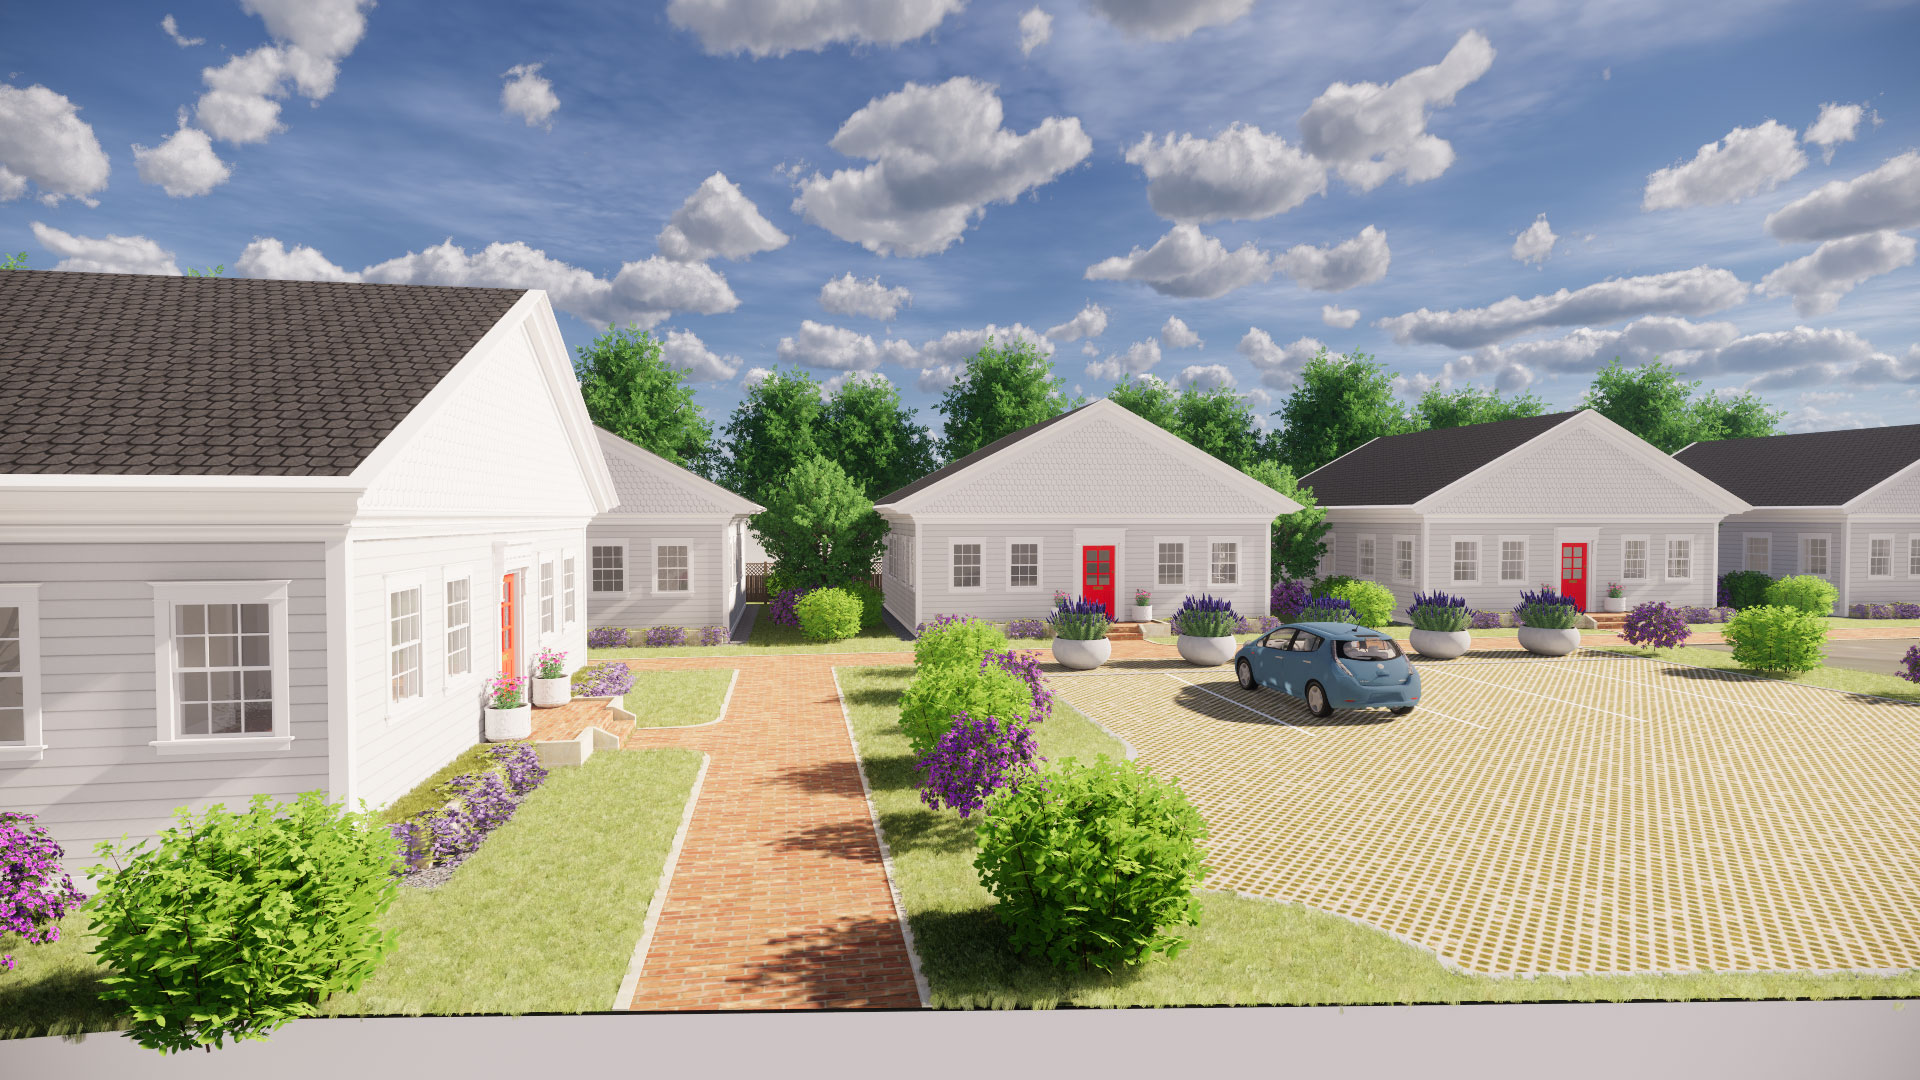 Closeup exterior render of line of 4 houses along brick path, blue sky and clouds above.